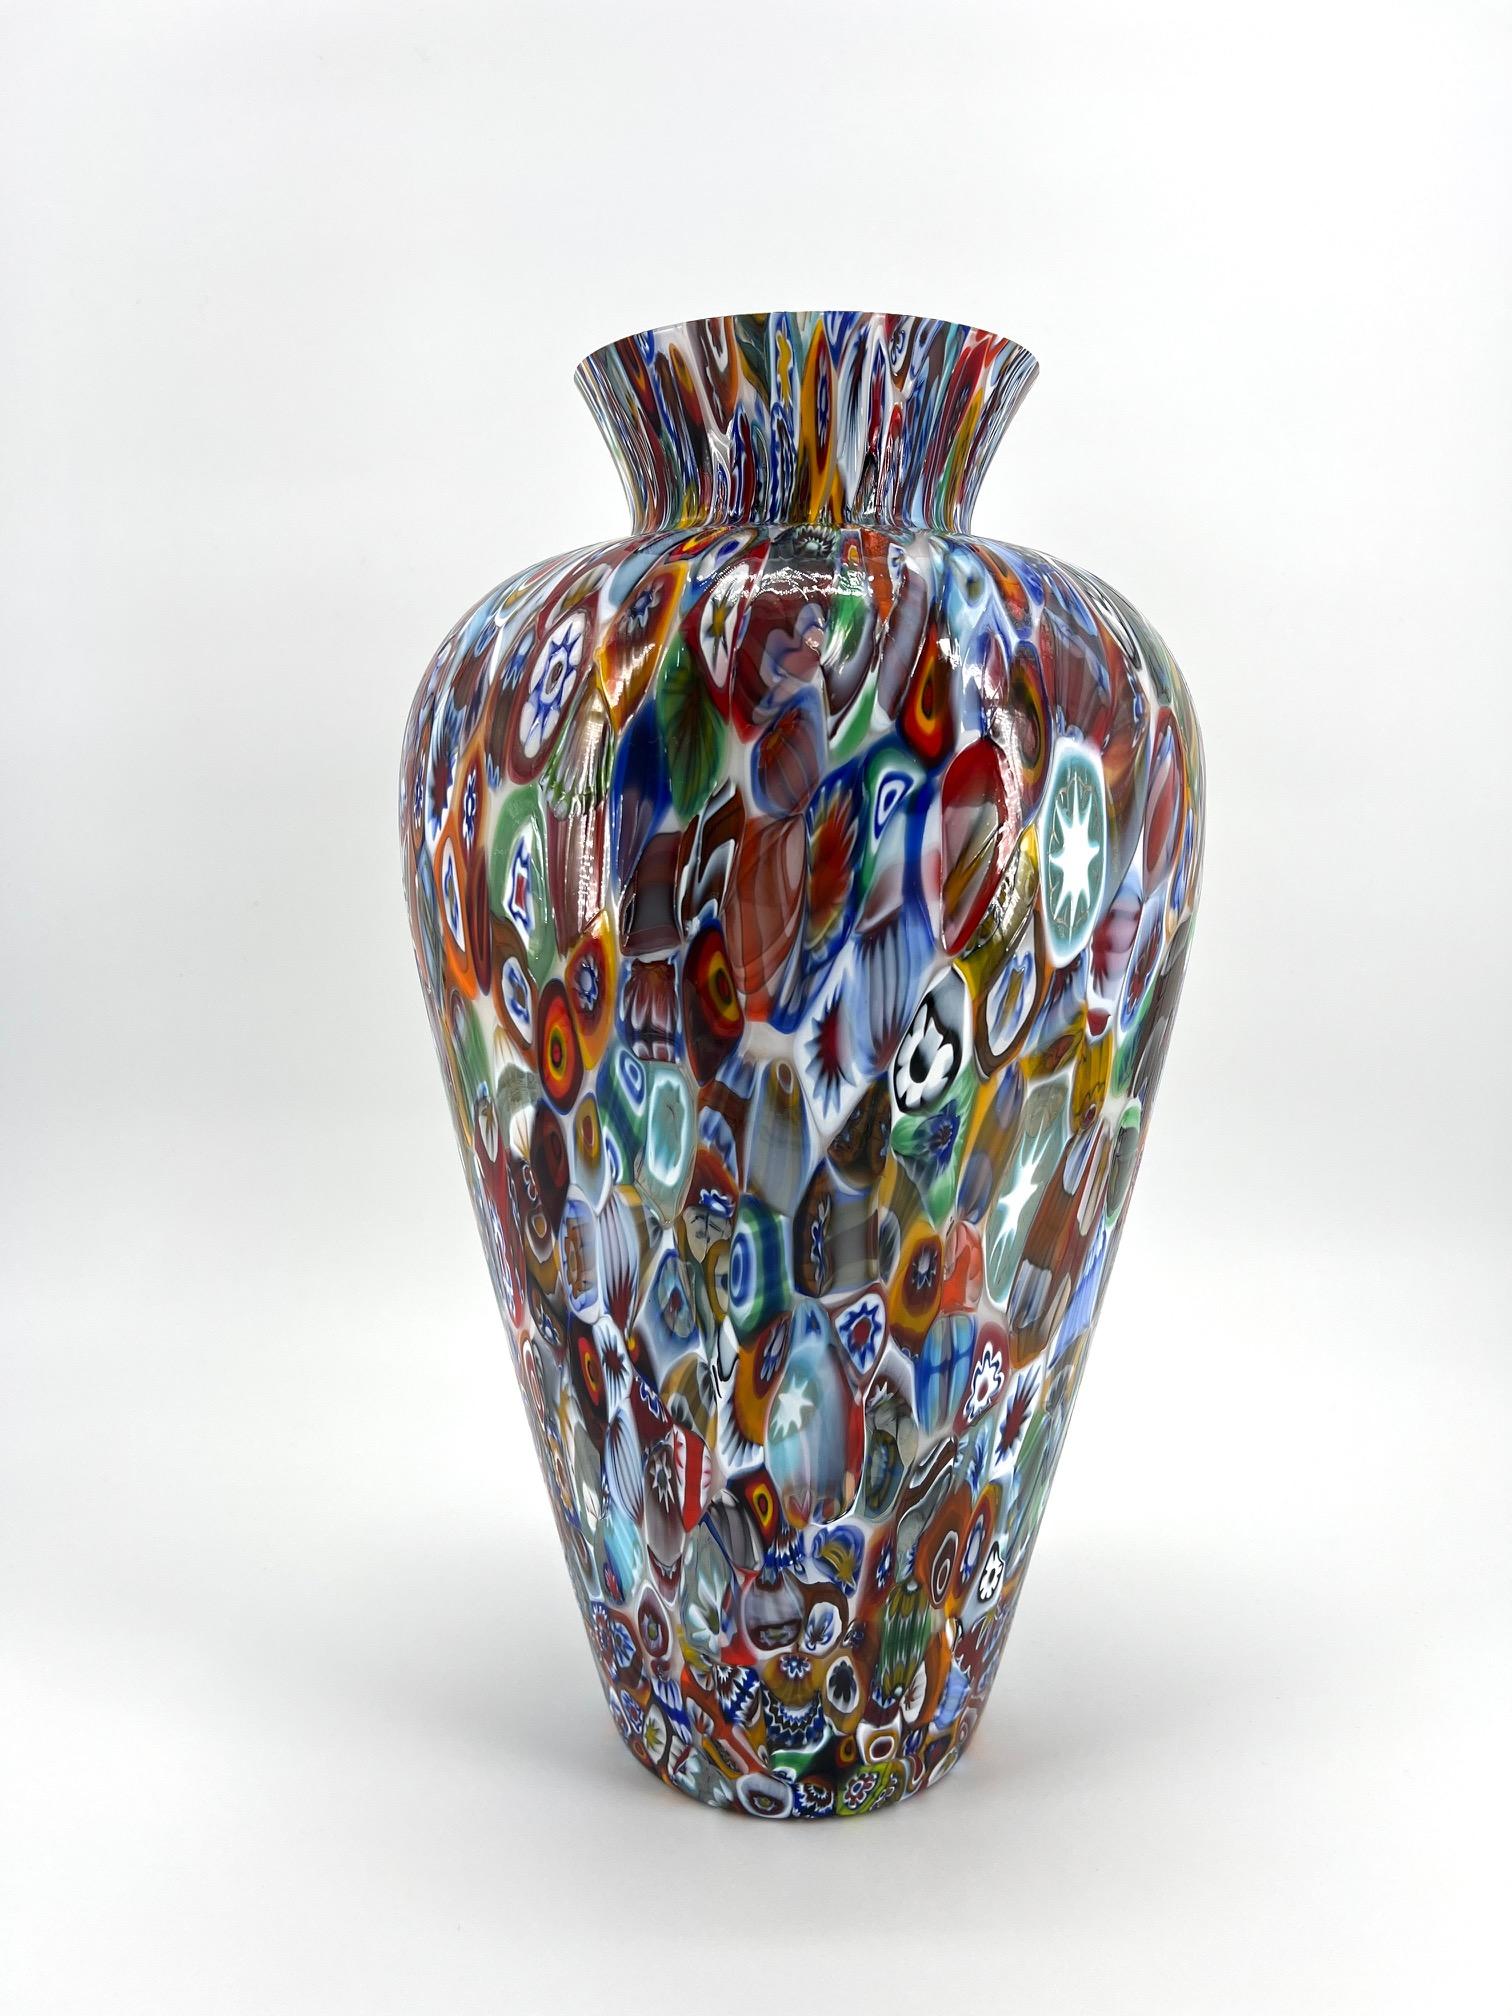 Our goal is to elicit emotions through the creation of unique and exquisite Murano glass art pieces. This art-vase is crafted using high-quality 